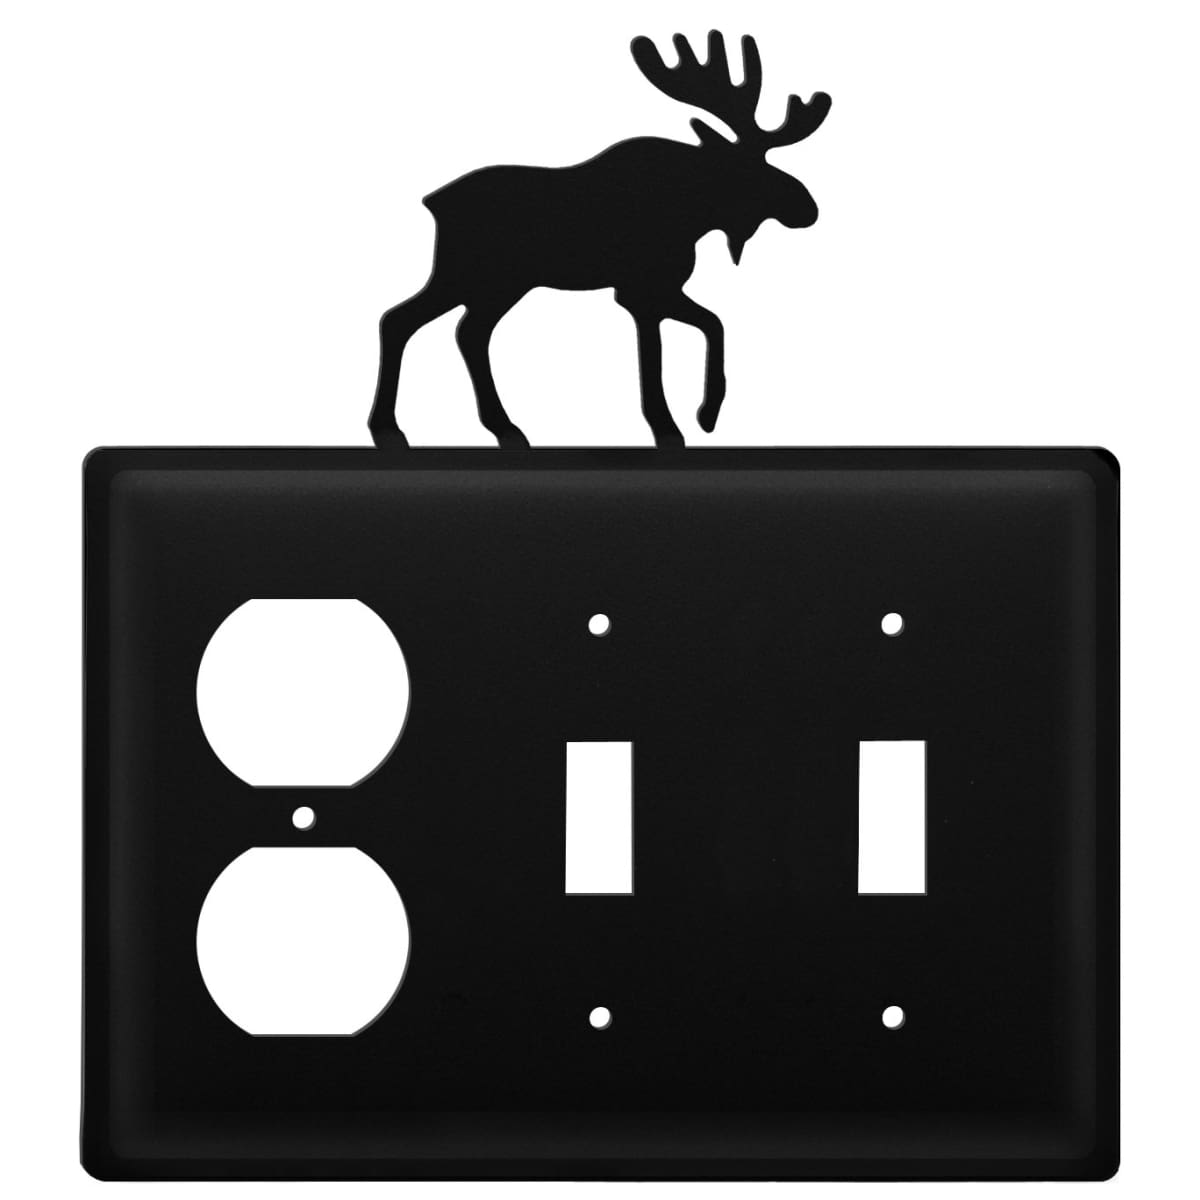 Triple Moose Single Outlet and Double Switch Cover CUSTOM Product